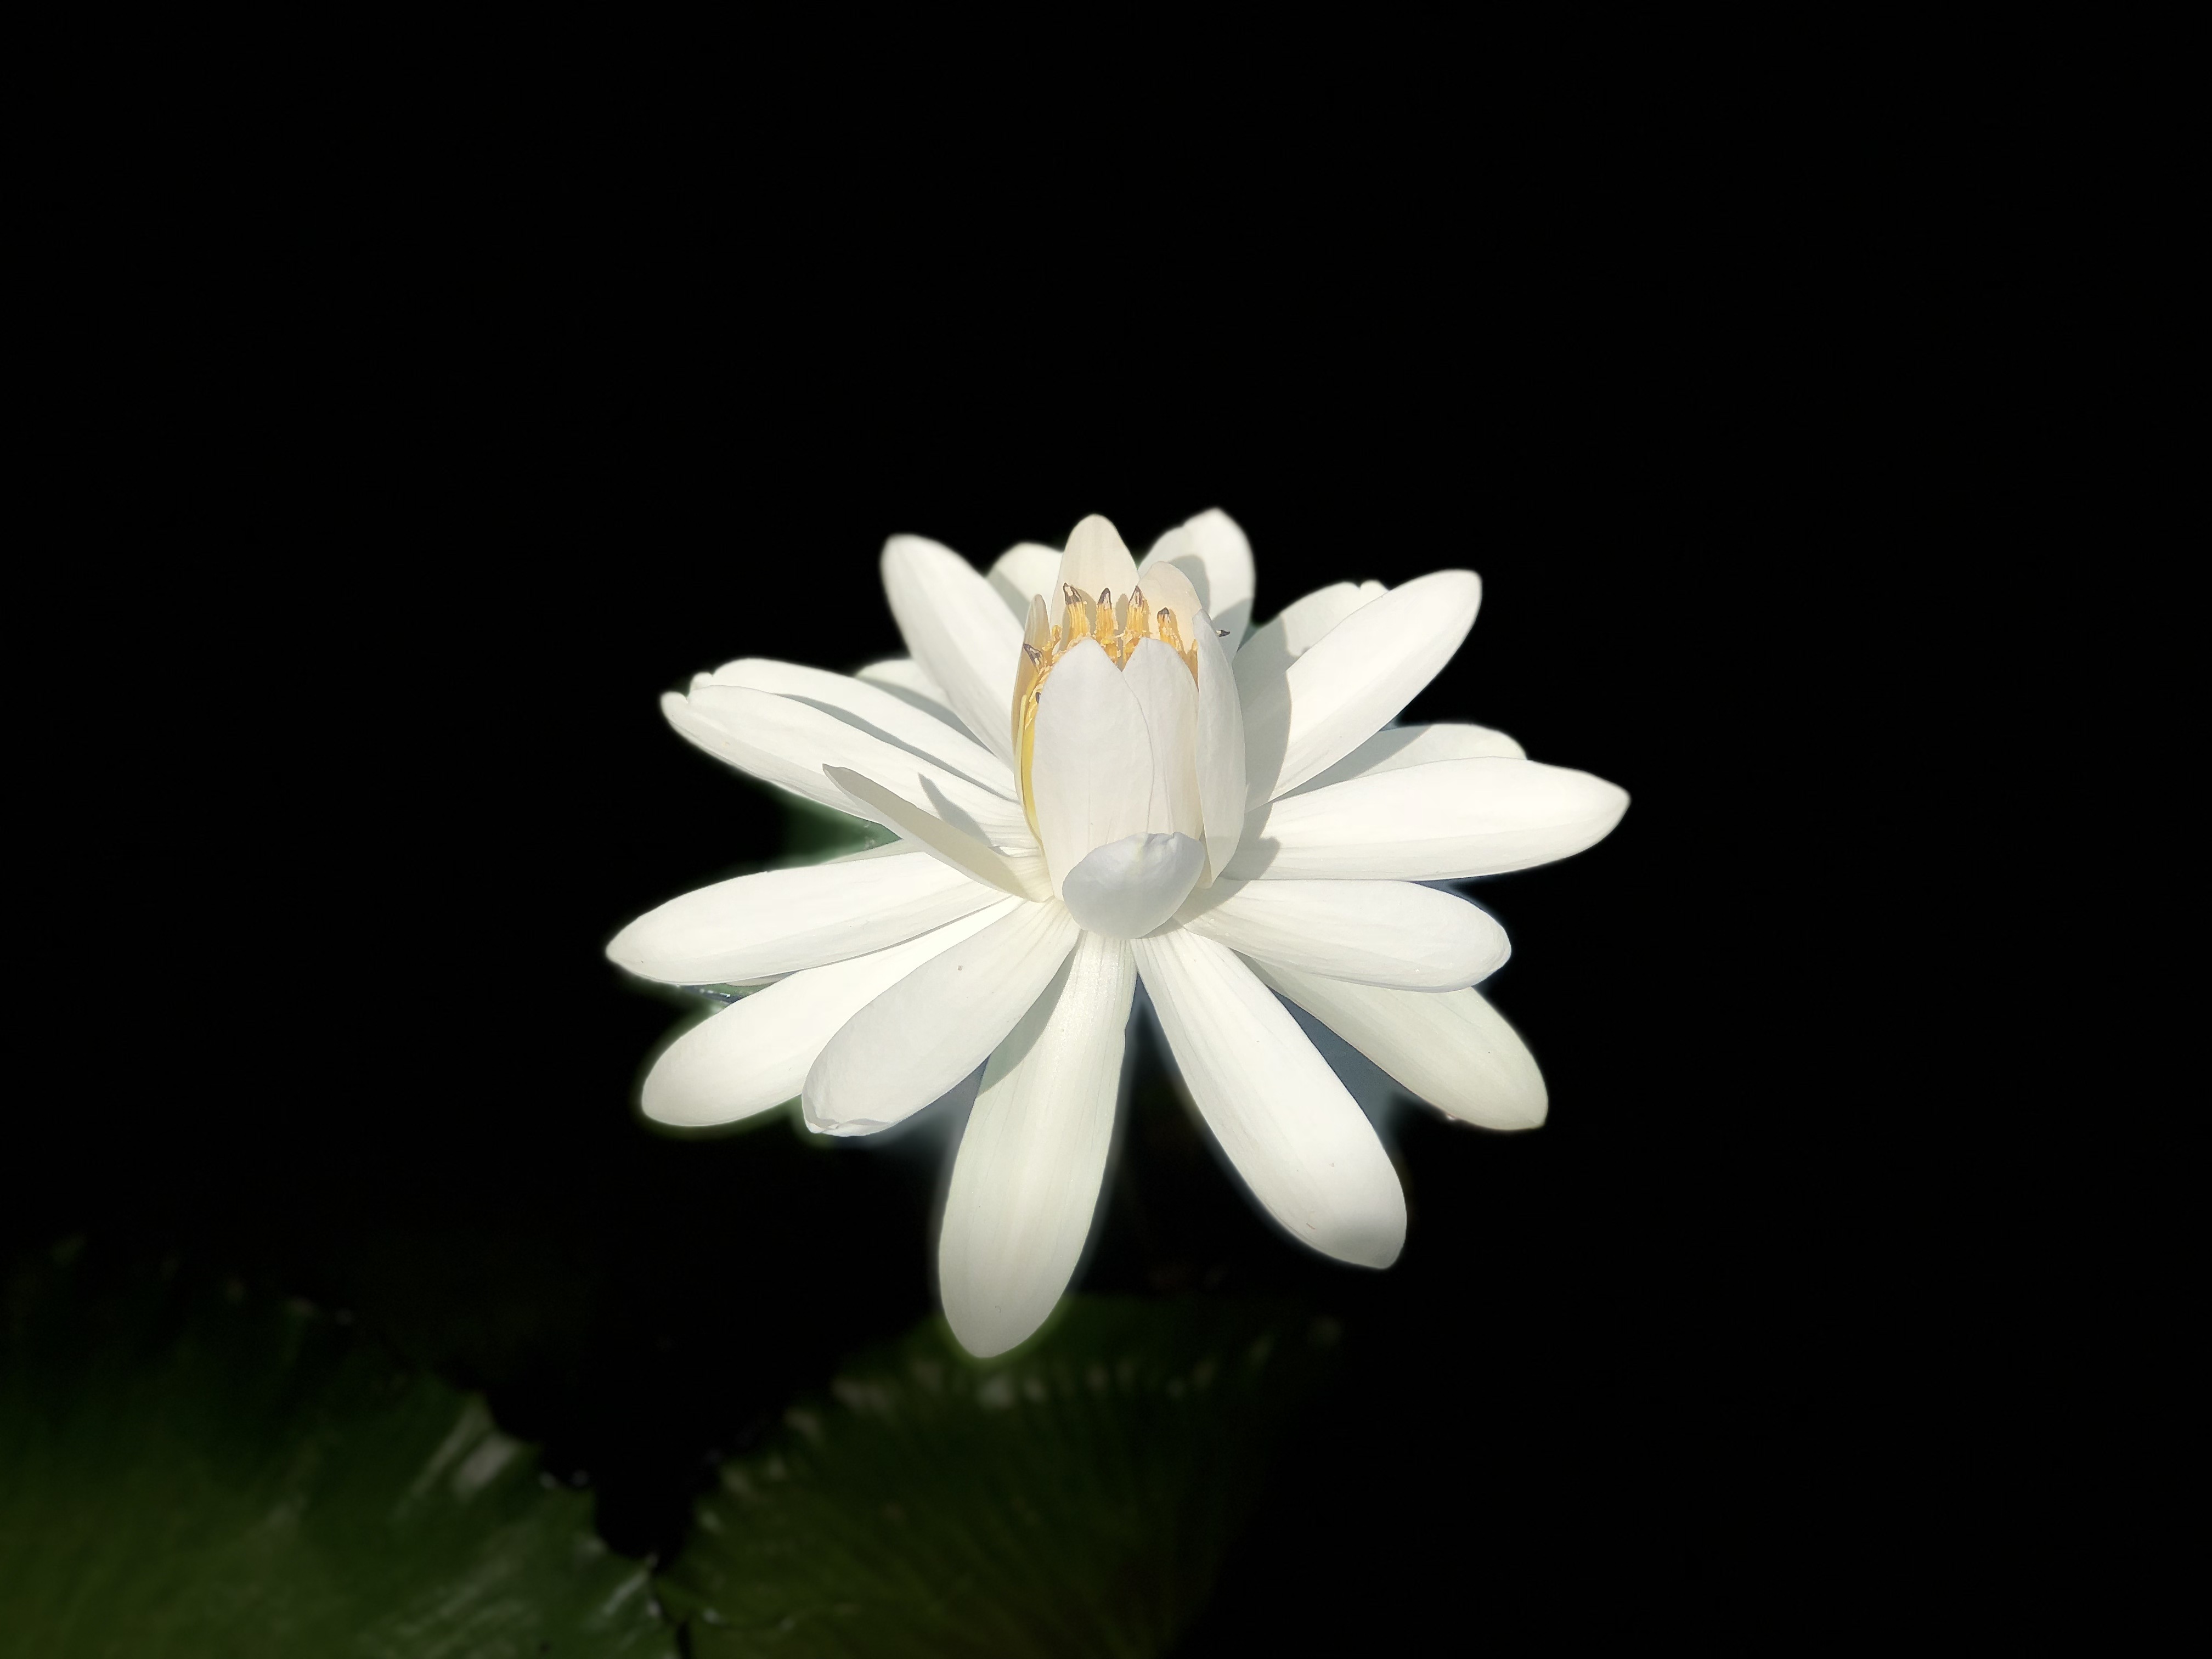 66182 download wallpaper dark background, flowers, lotus, white, bloom, flowering screensavers and pictures for free